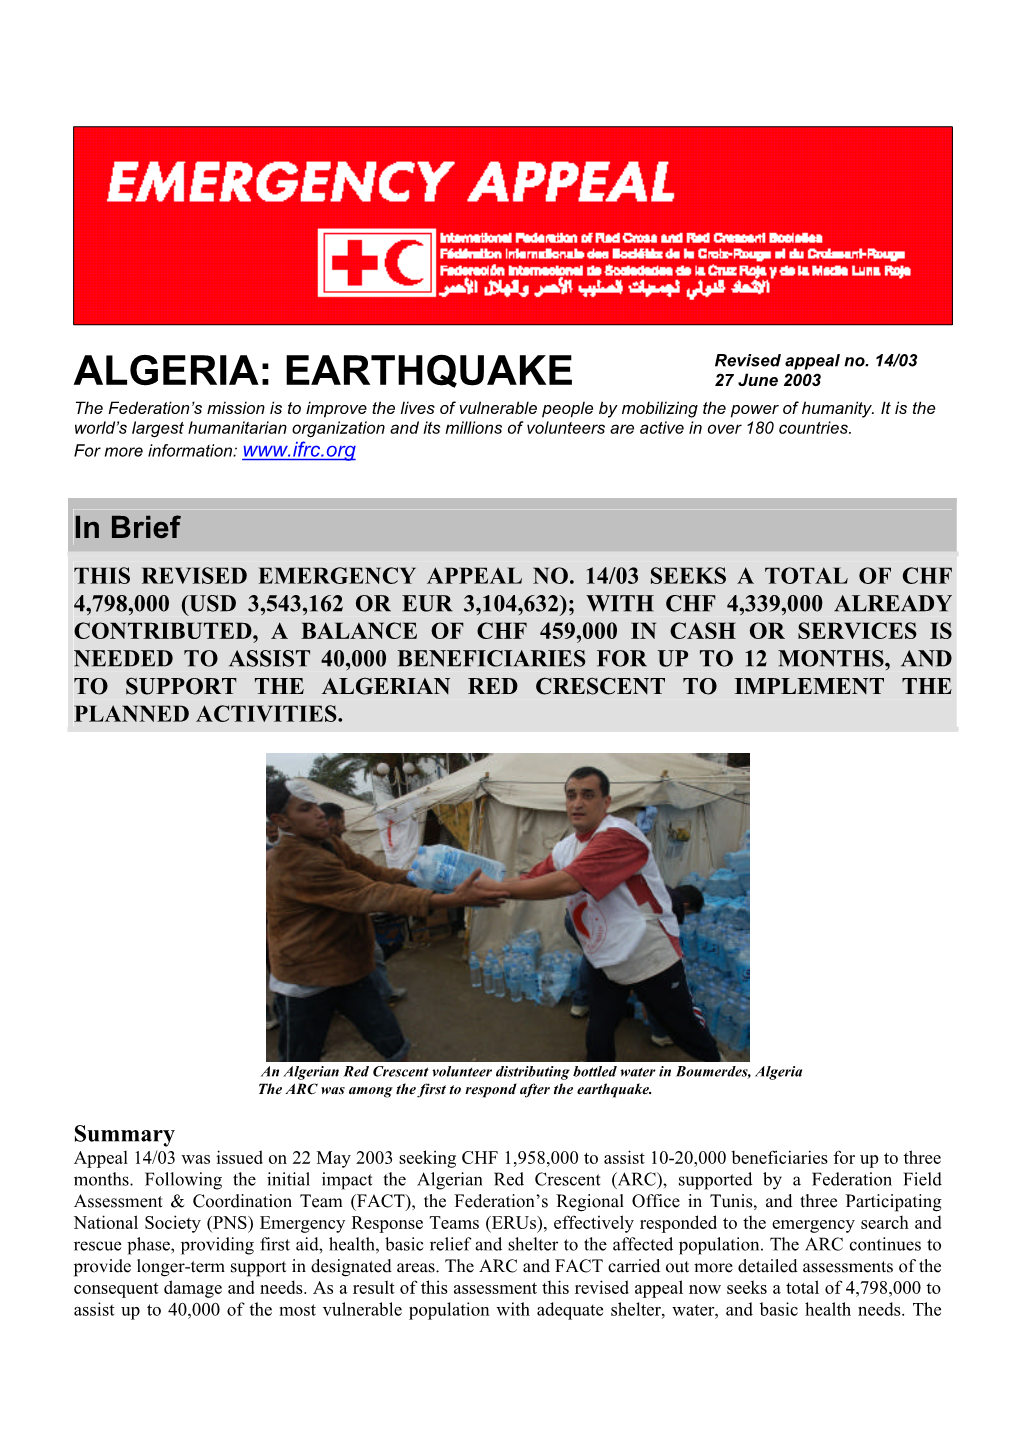 EARTHQUAKE 27 June 2003 the Federation’S Mission Is to Improve the Lives of Vulnerable People by Mobilizing the Power of Humanity